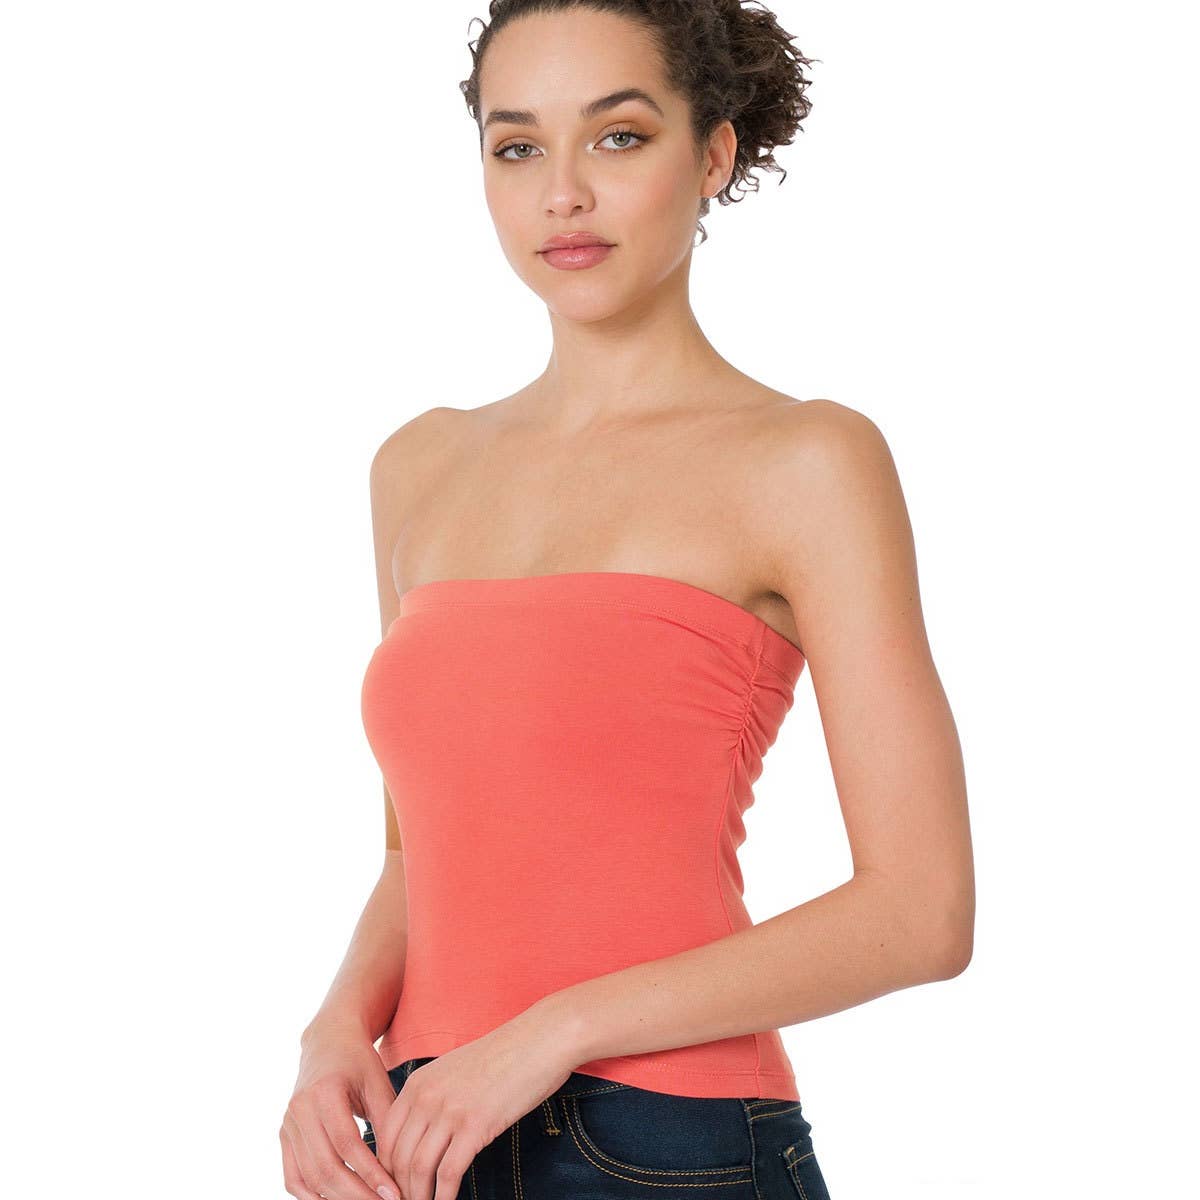 WOMEN'S CASUAL STRAPLESS BANDEAU COTTON TUBE TOP BUILT-IN LAYER